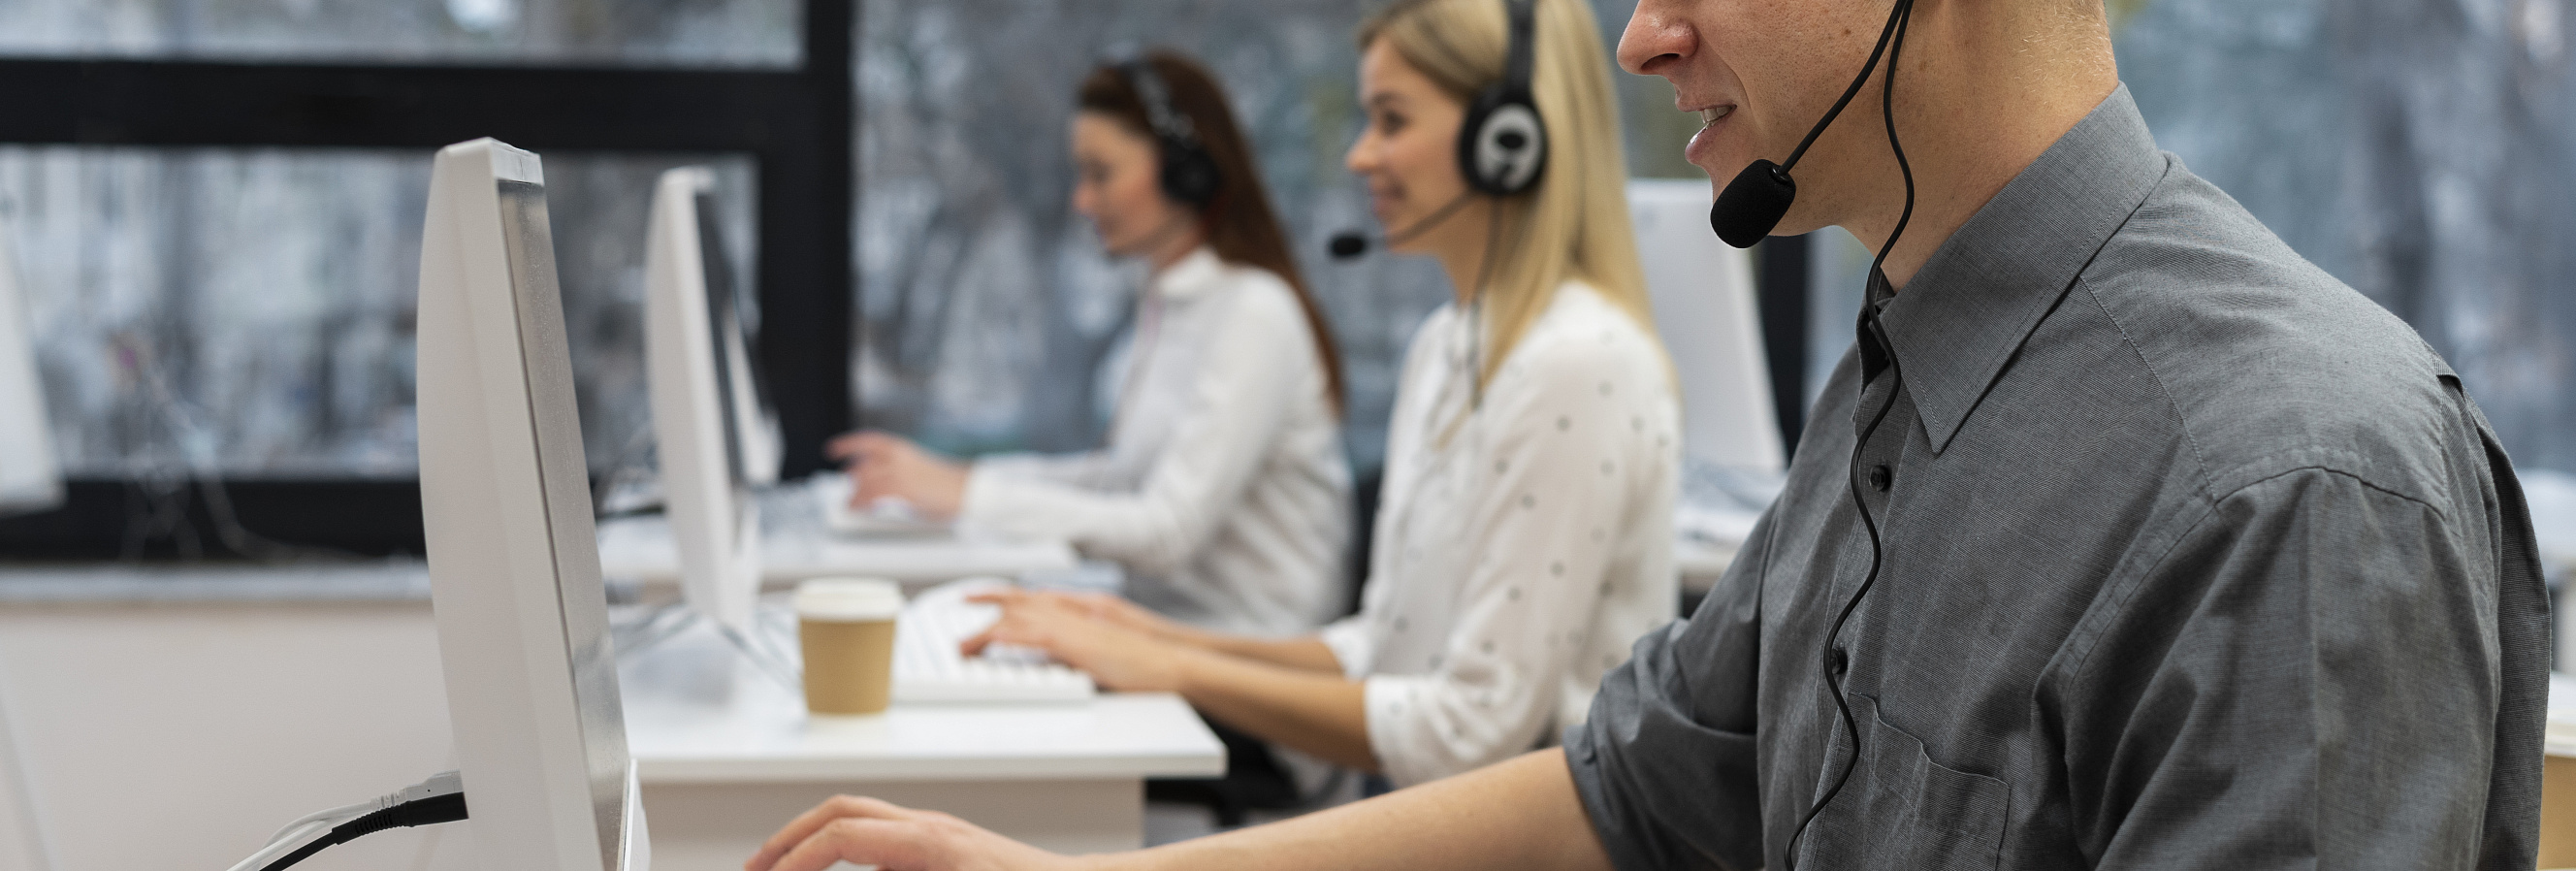 Multilingual Customer Experience Center vs. Traditional Support: Pros and Cons